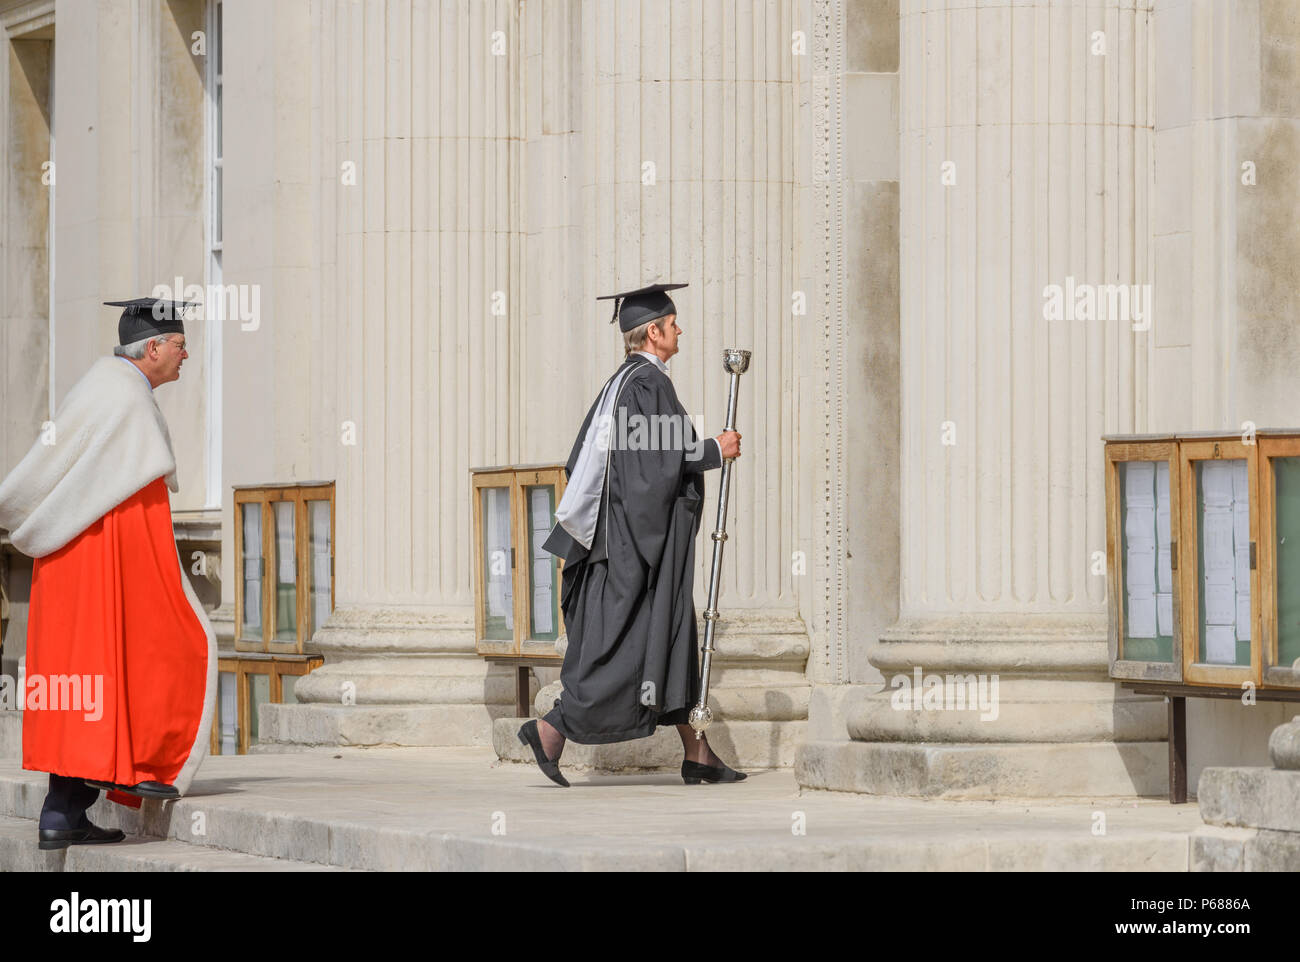 Cambridge, England. 28 June 2018. The vice-chancellor of Cambridge University, England, dressed in his crimson academic gown, and preceded as well as followed by esquire bedells with maces, processes through the grounds of Senate House to the main building where he presides at the degree/graduation ceremony on 28th June 2018. Credit: Michael Foley/Alamy Live News Stock Photo